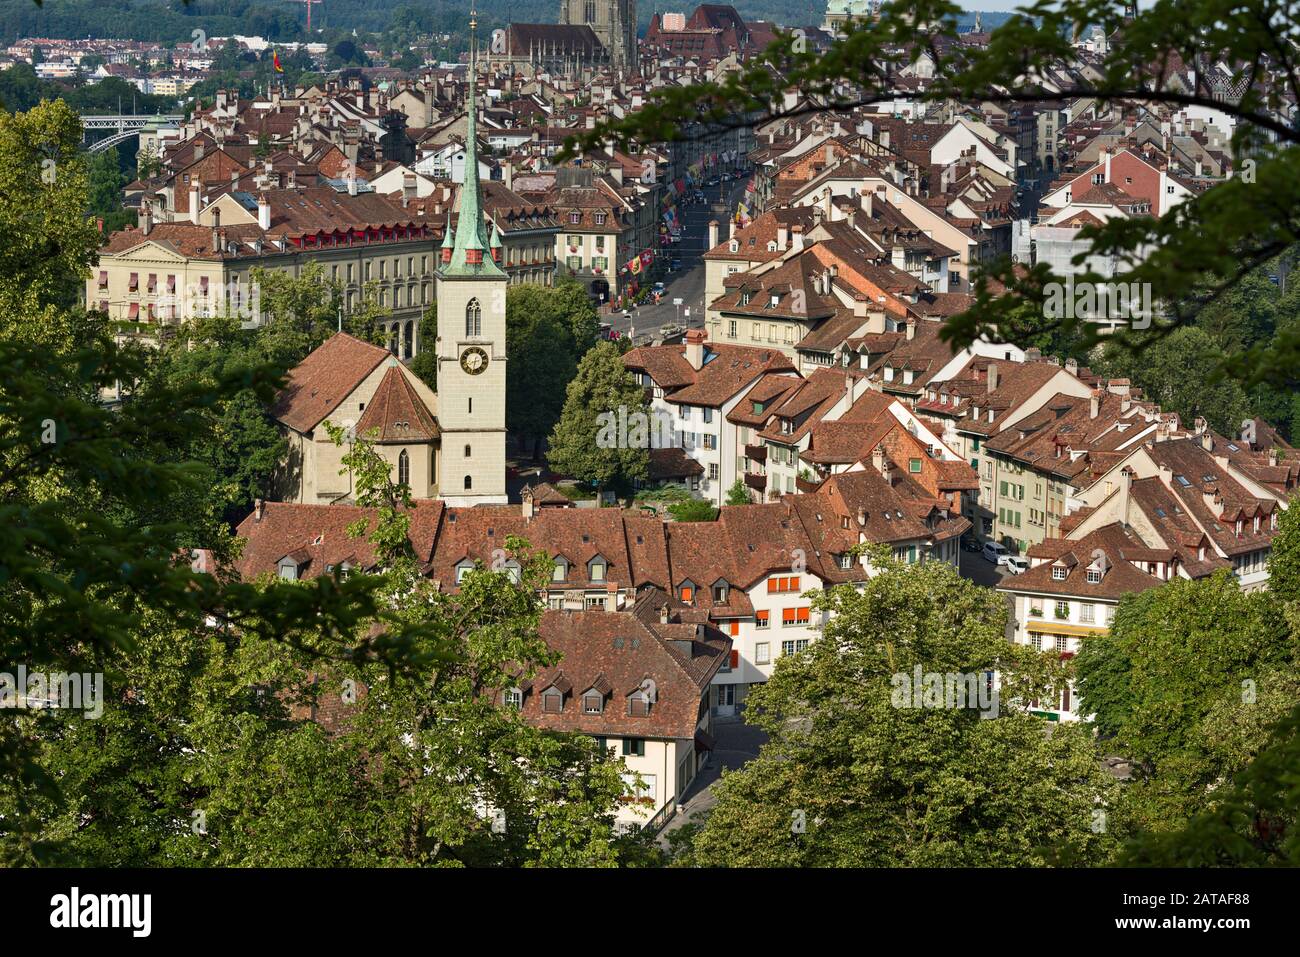 The Reformed Nydeggkirche  is located on the eastern edge of the Old City of Bern, Switzerland Stock Photo